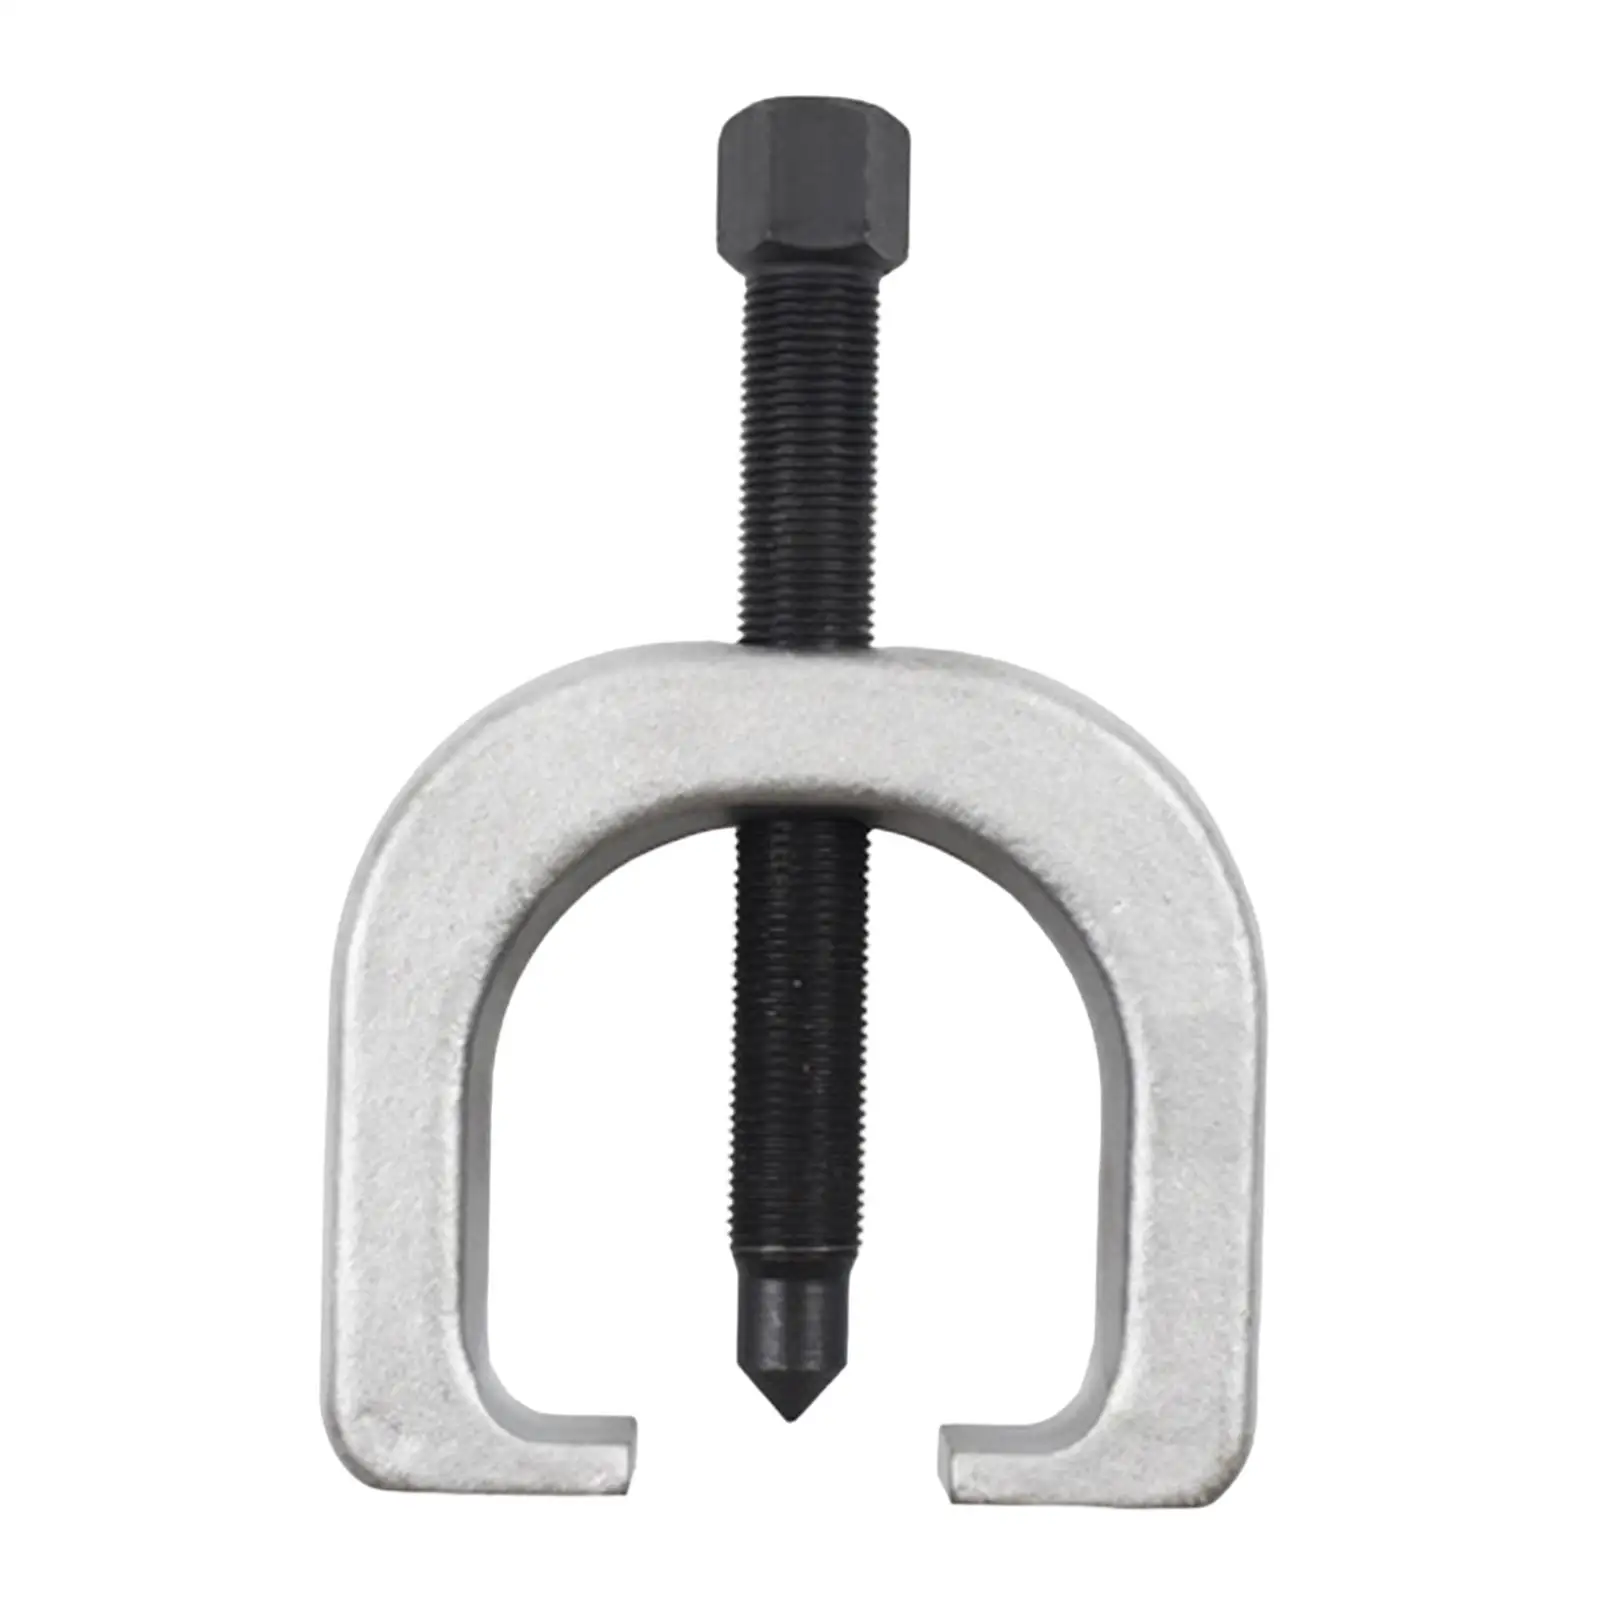 Slack Adjuster Puller High Performance Carbon Steel Sturdy Heavy Duty Professional Maintenance Tool for Trailers Trucks